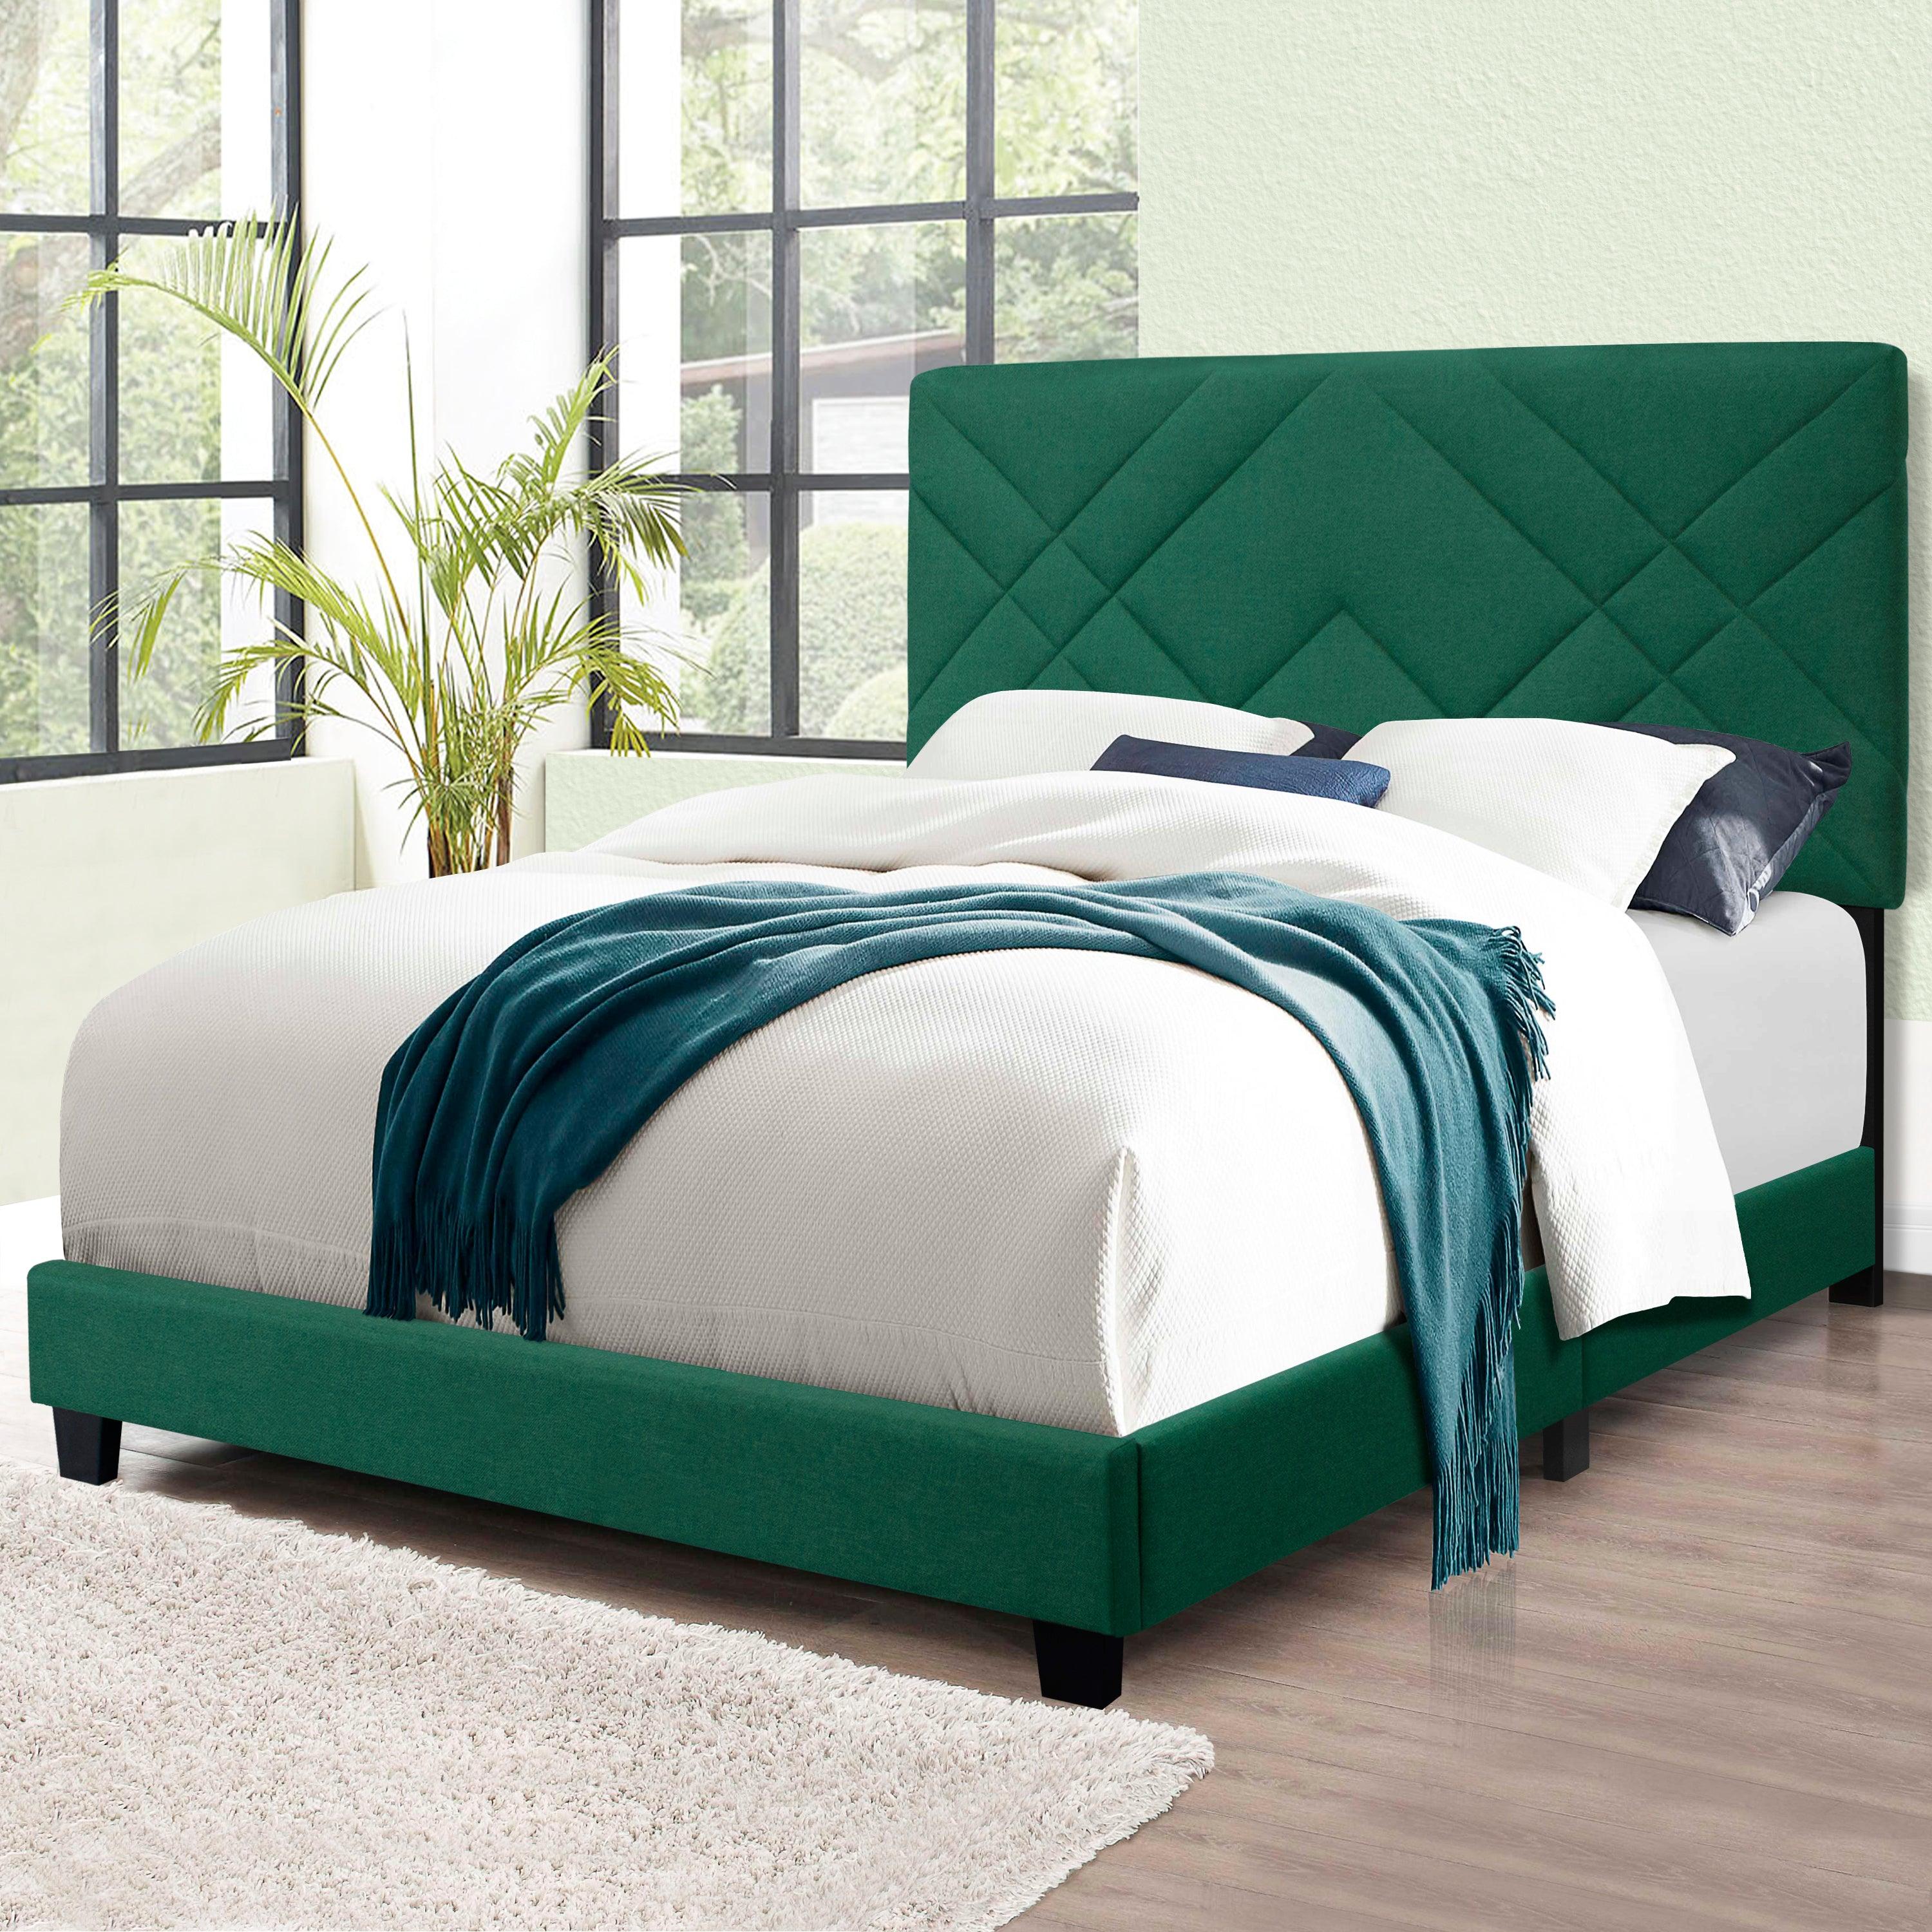 🆓🚛 Queen Size Bed Frame With Adjustable Headboard Super Affordable, Green